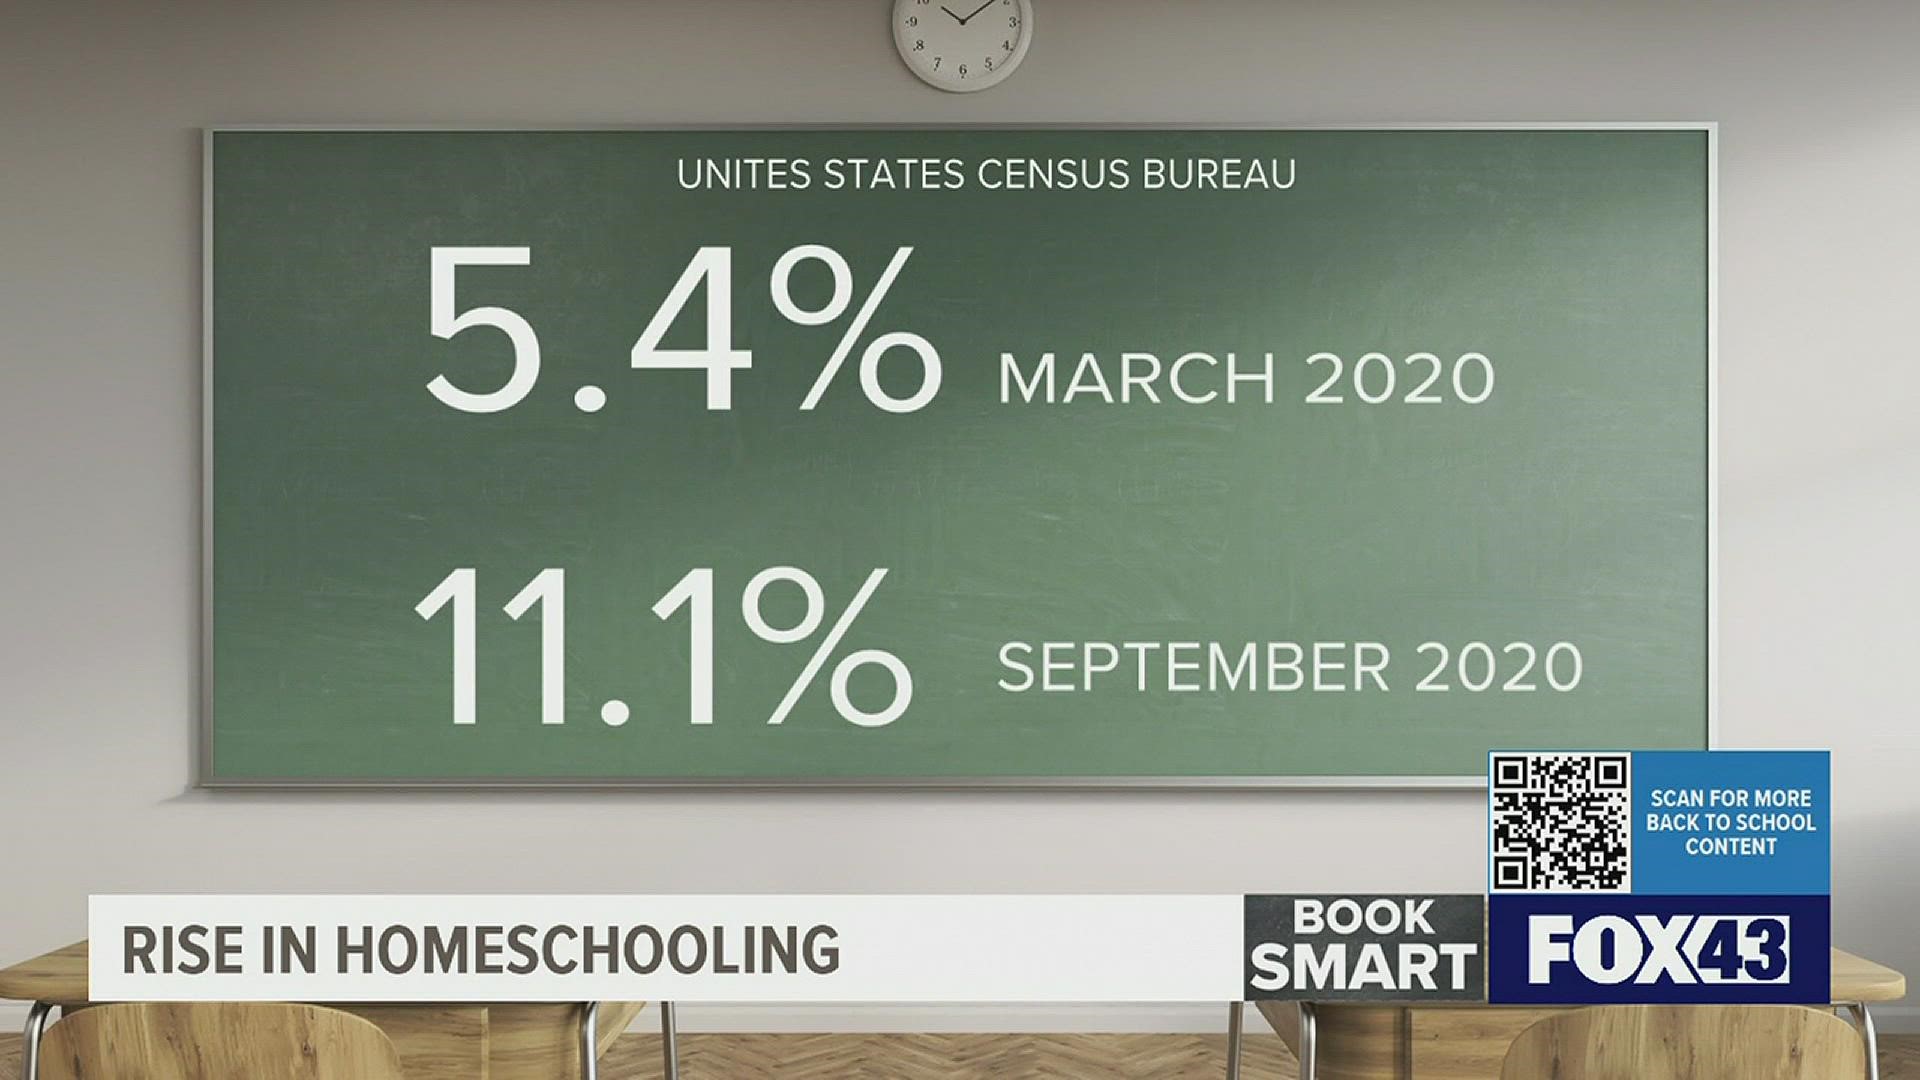 The number of households choosing to homeschool their children nearly doubled from March 2020 to Sept. 2020, from 5.4% to 11.1%.